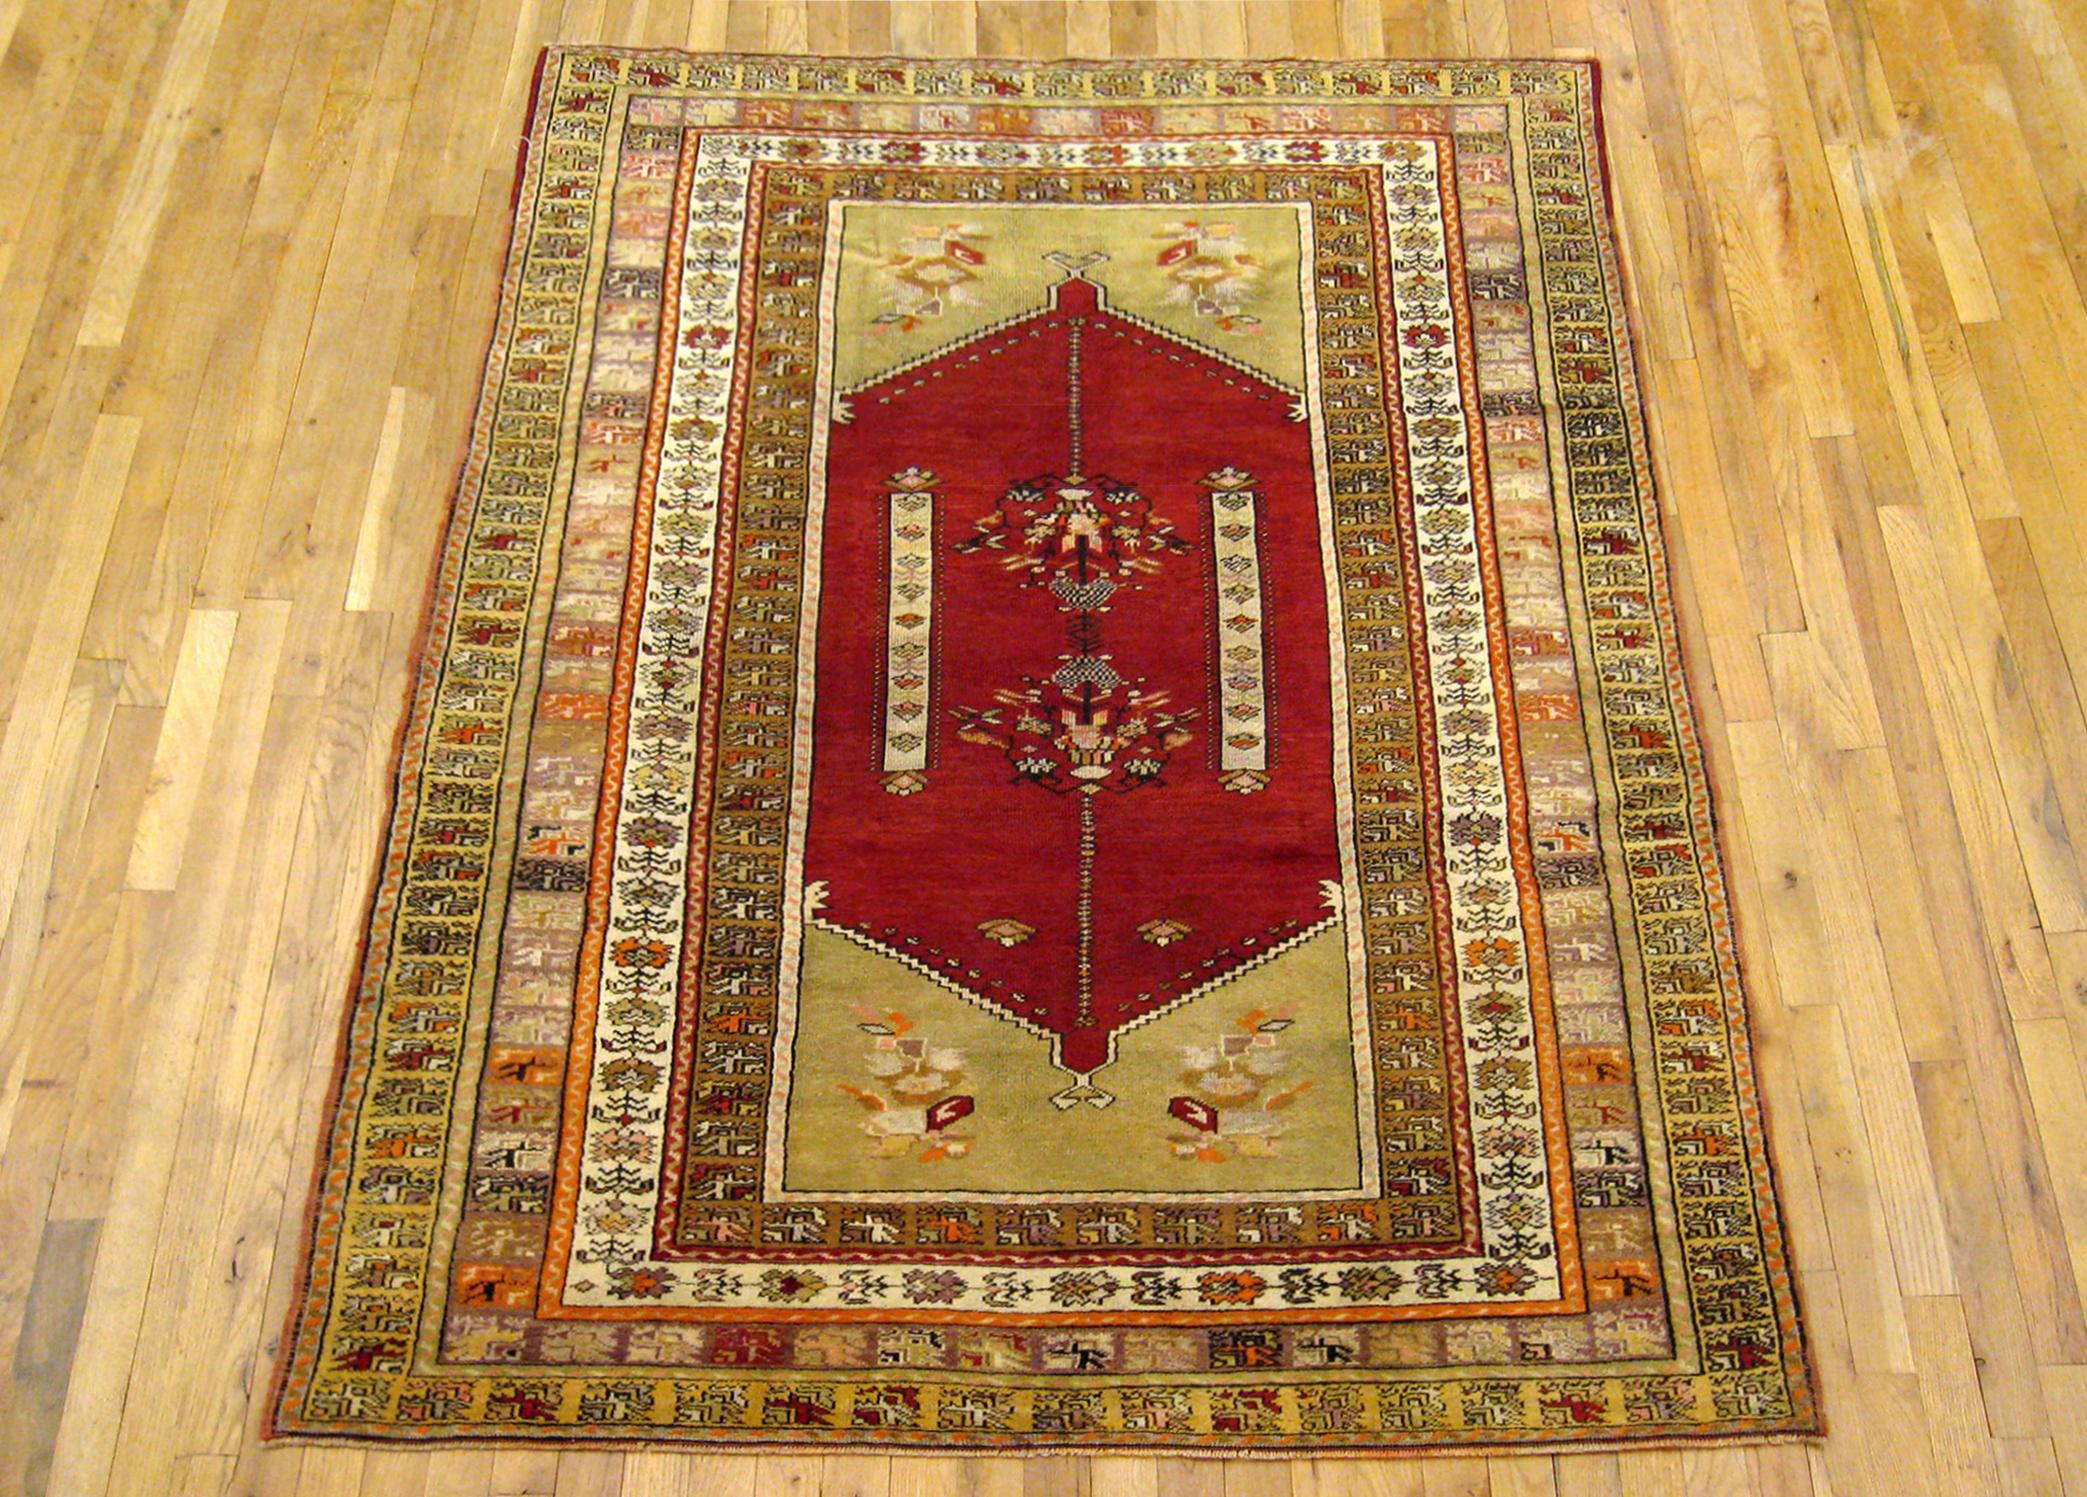 Antique Turkish Sivas Rug, Small size, circa 1920

A one-of-a-kind antique Turkish Sivas Oriental Carpet, hand-knotted with soft wool pile. This beautiful rug features a delicate central medallion with an end design on a soft red primary field, with